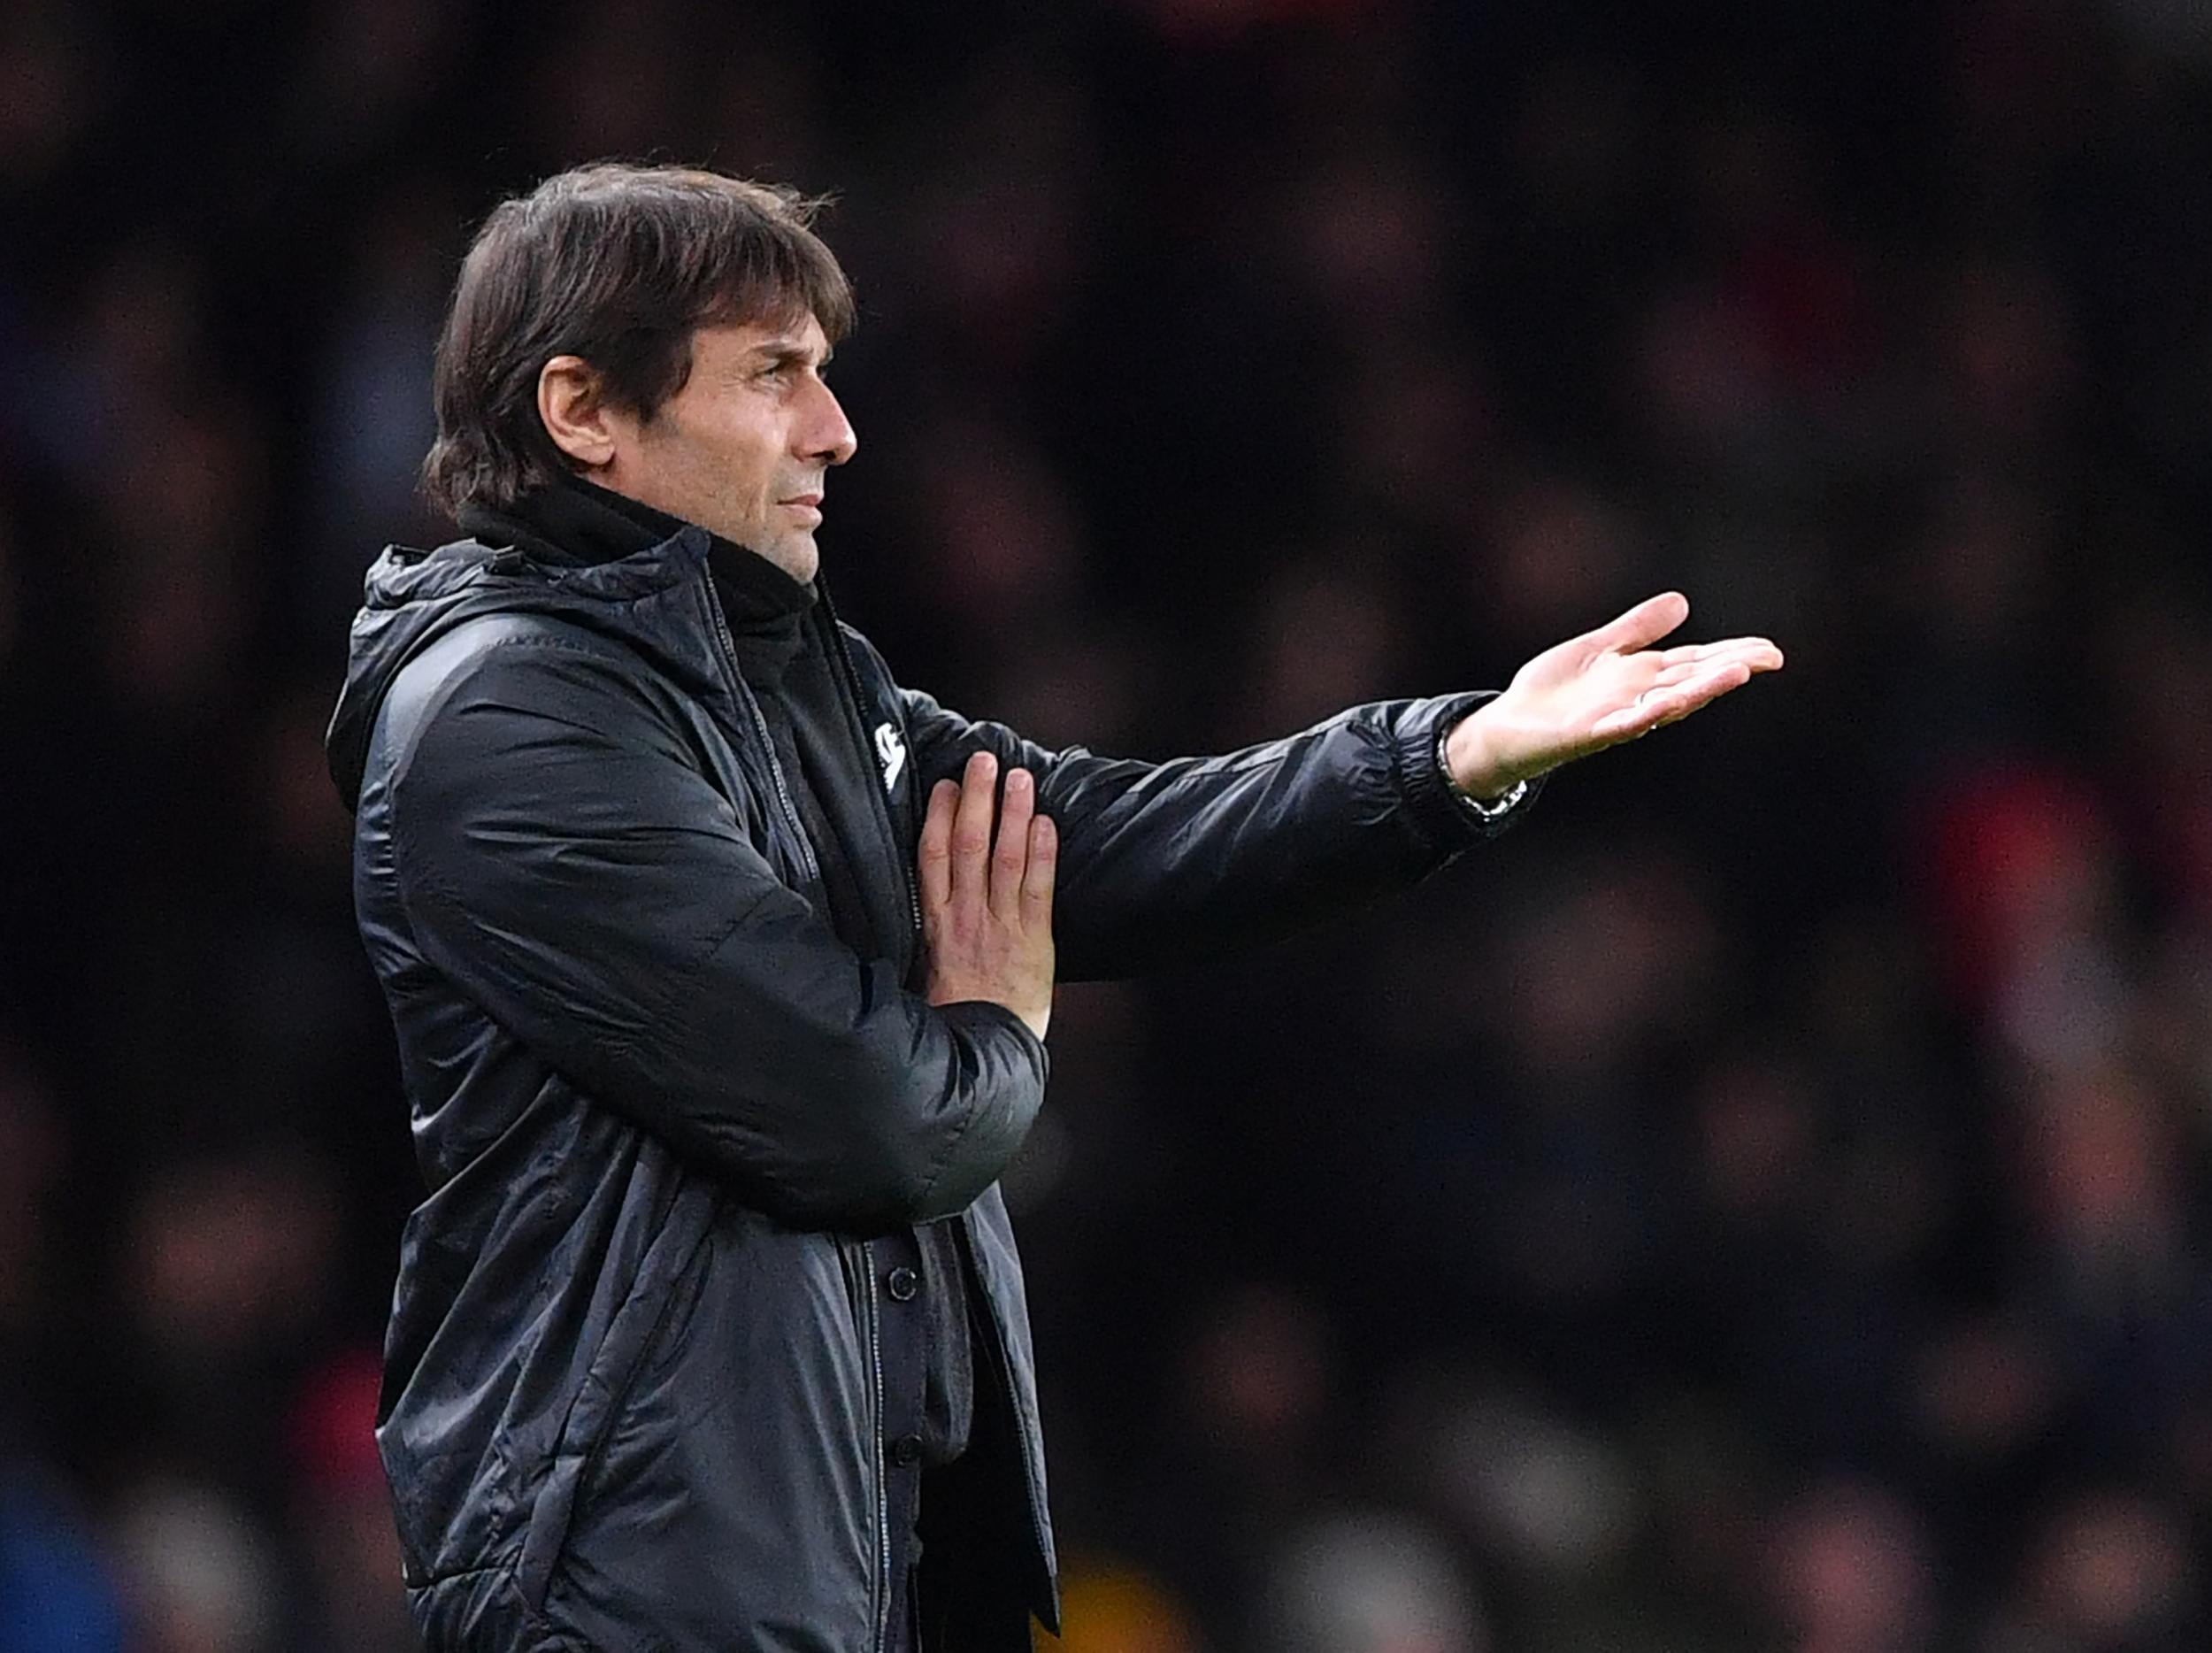 Antonio Conte's Chelsea side crashed out of the EFL Cup to Arsenal